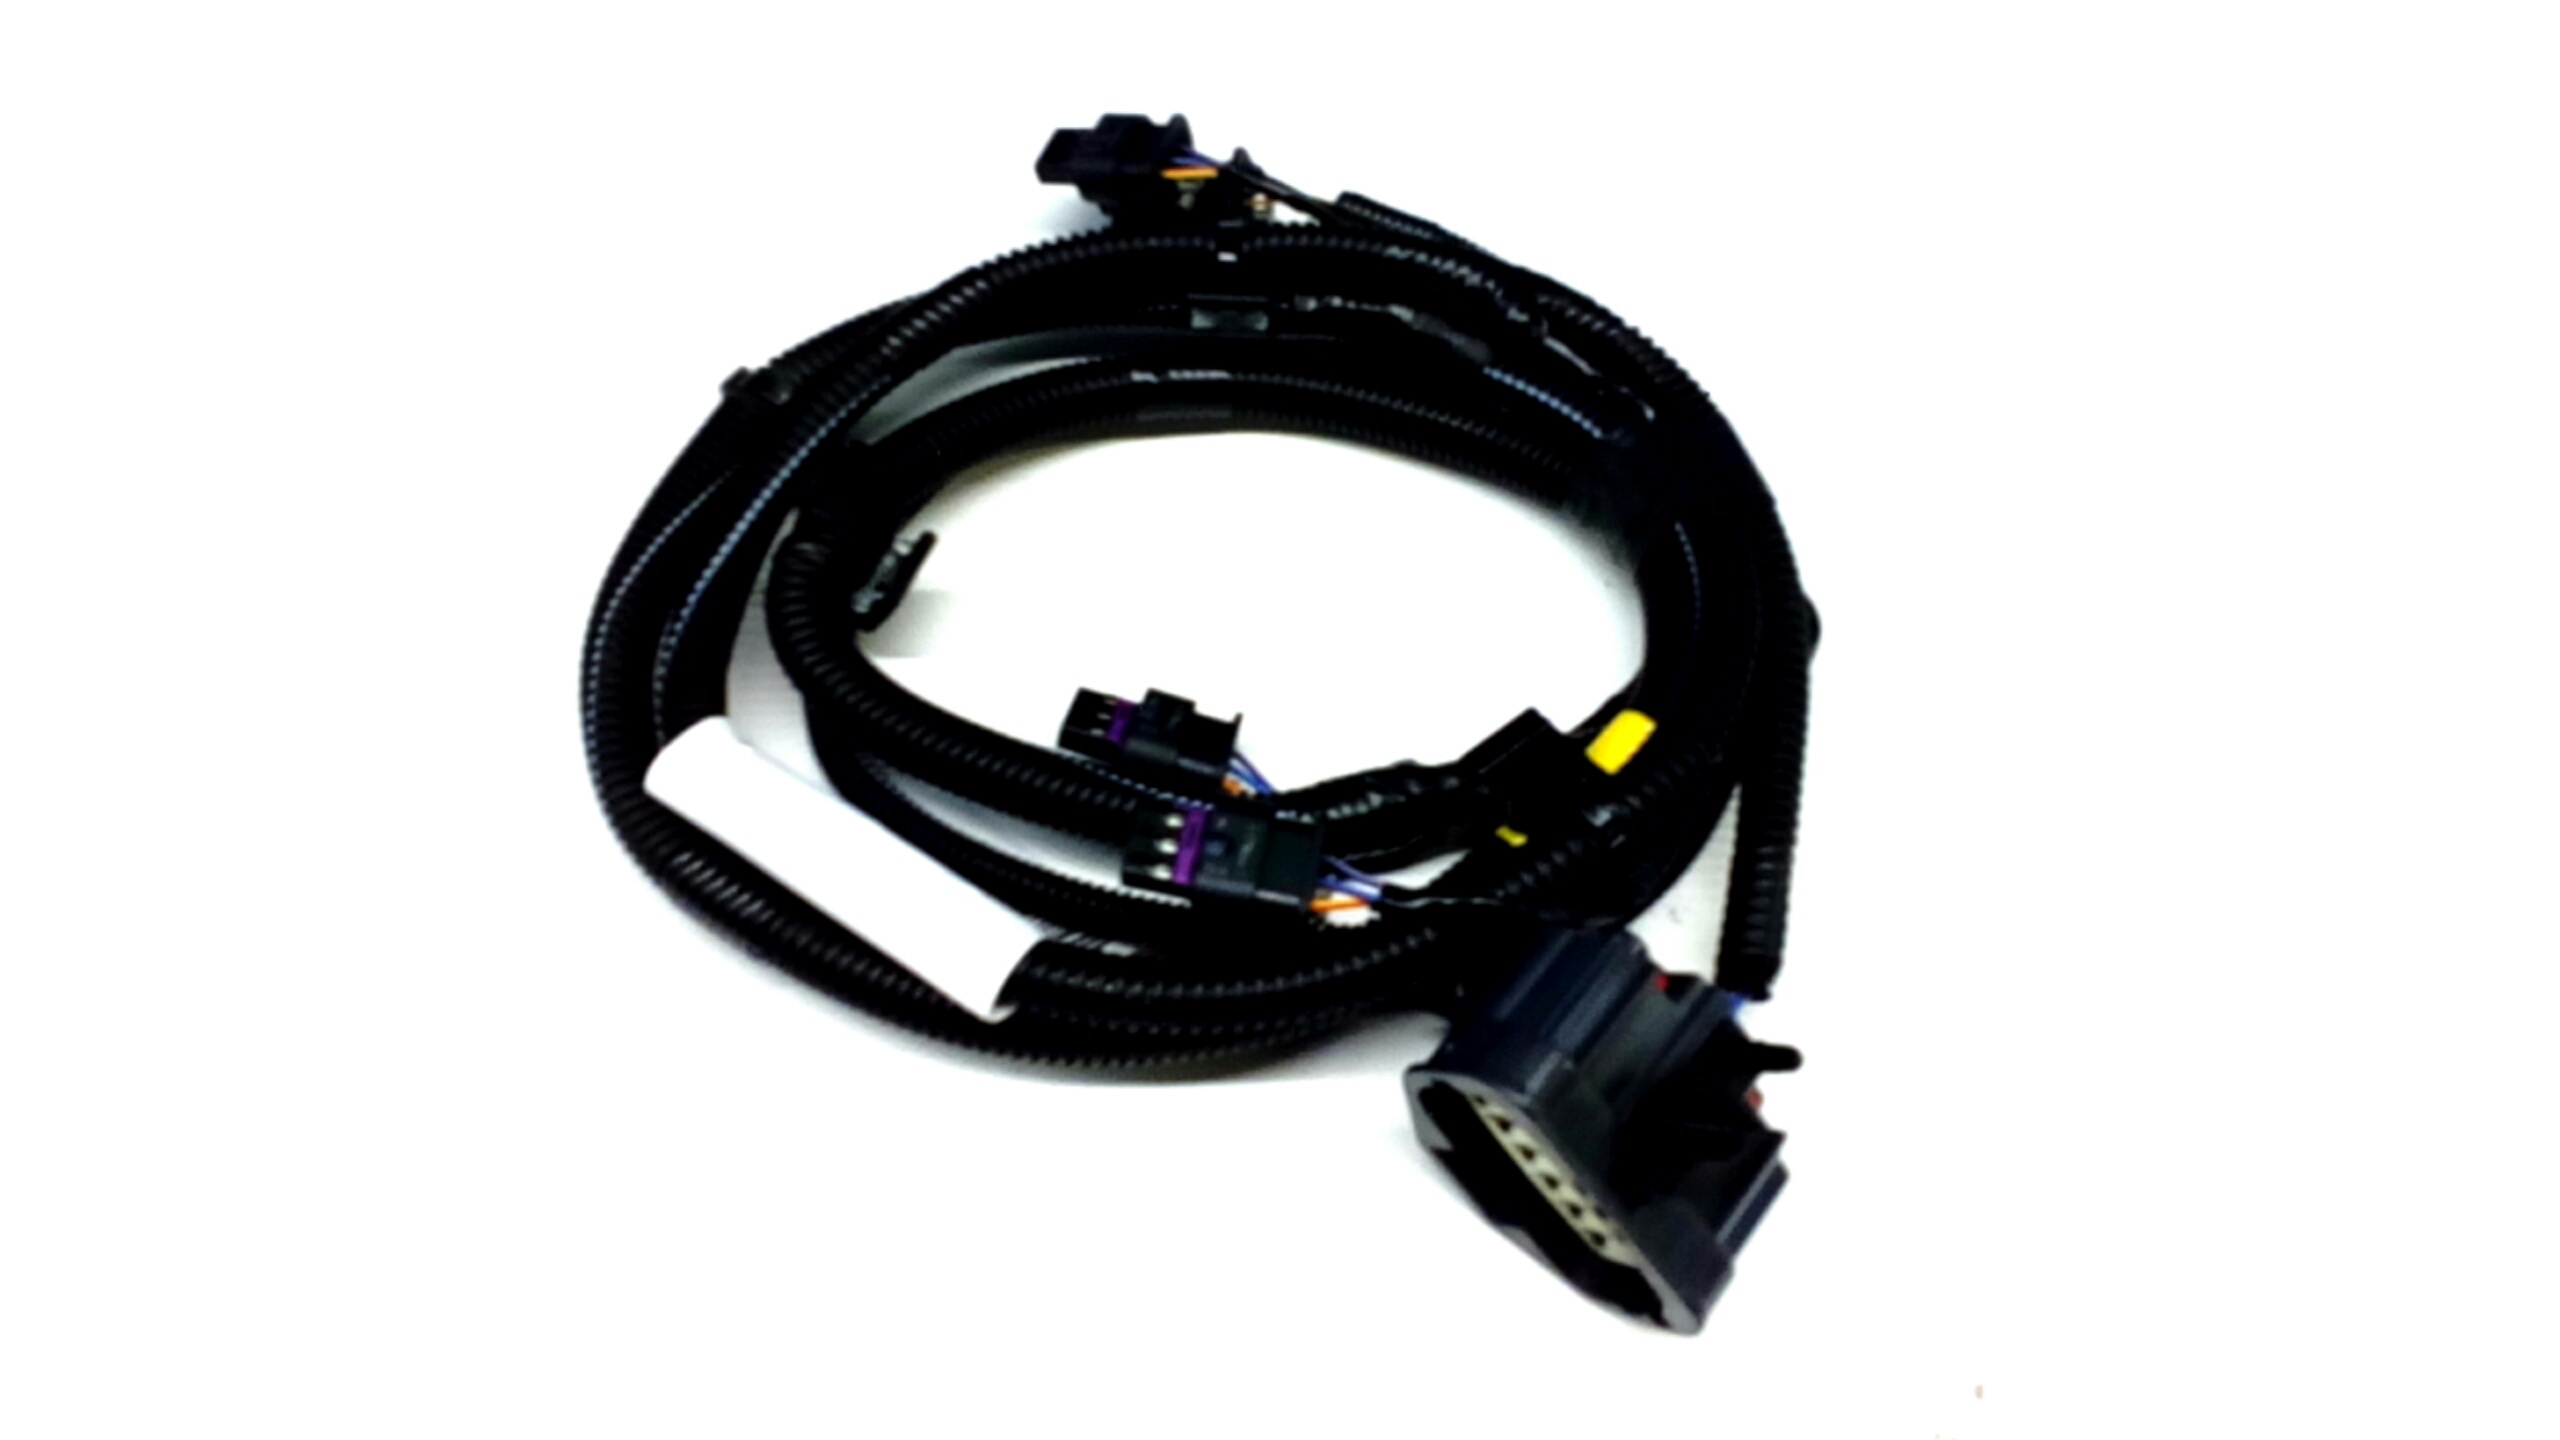 Volvo S80 Parking Aid System Wiring Harness (Front) - 31296350 | Volvo ...